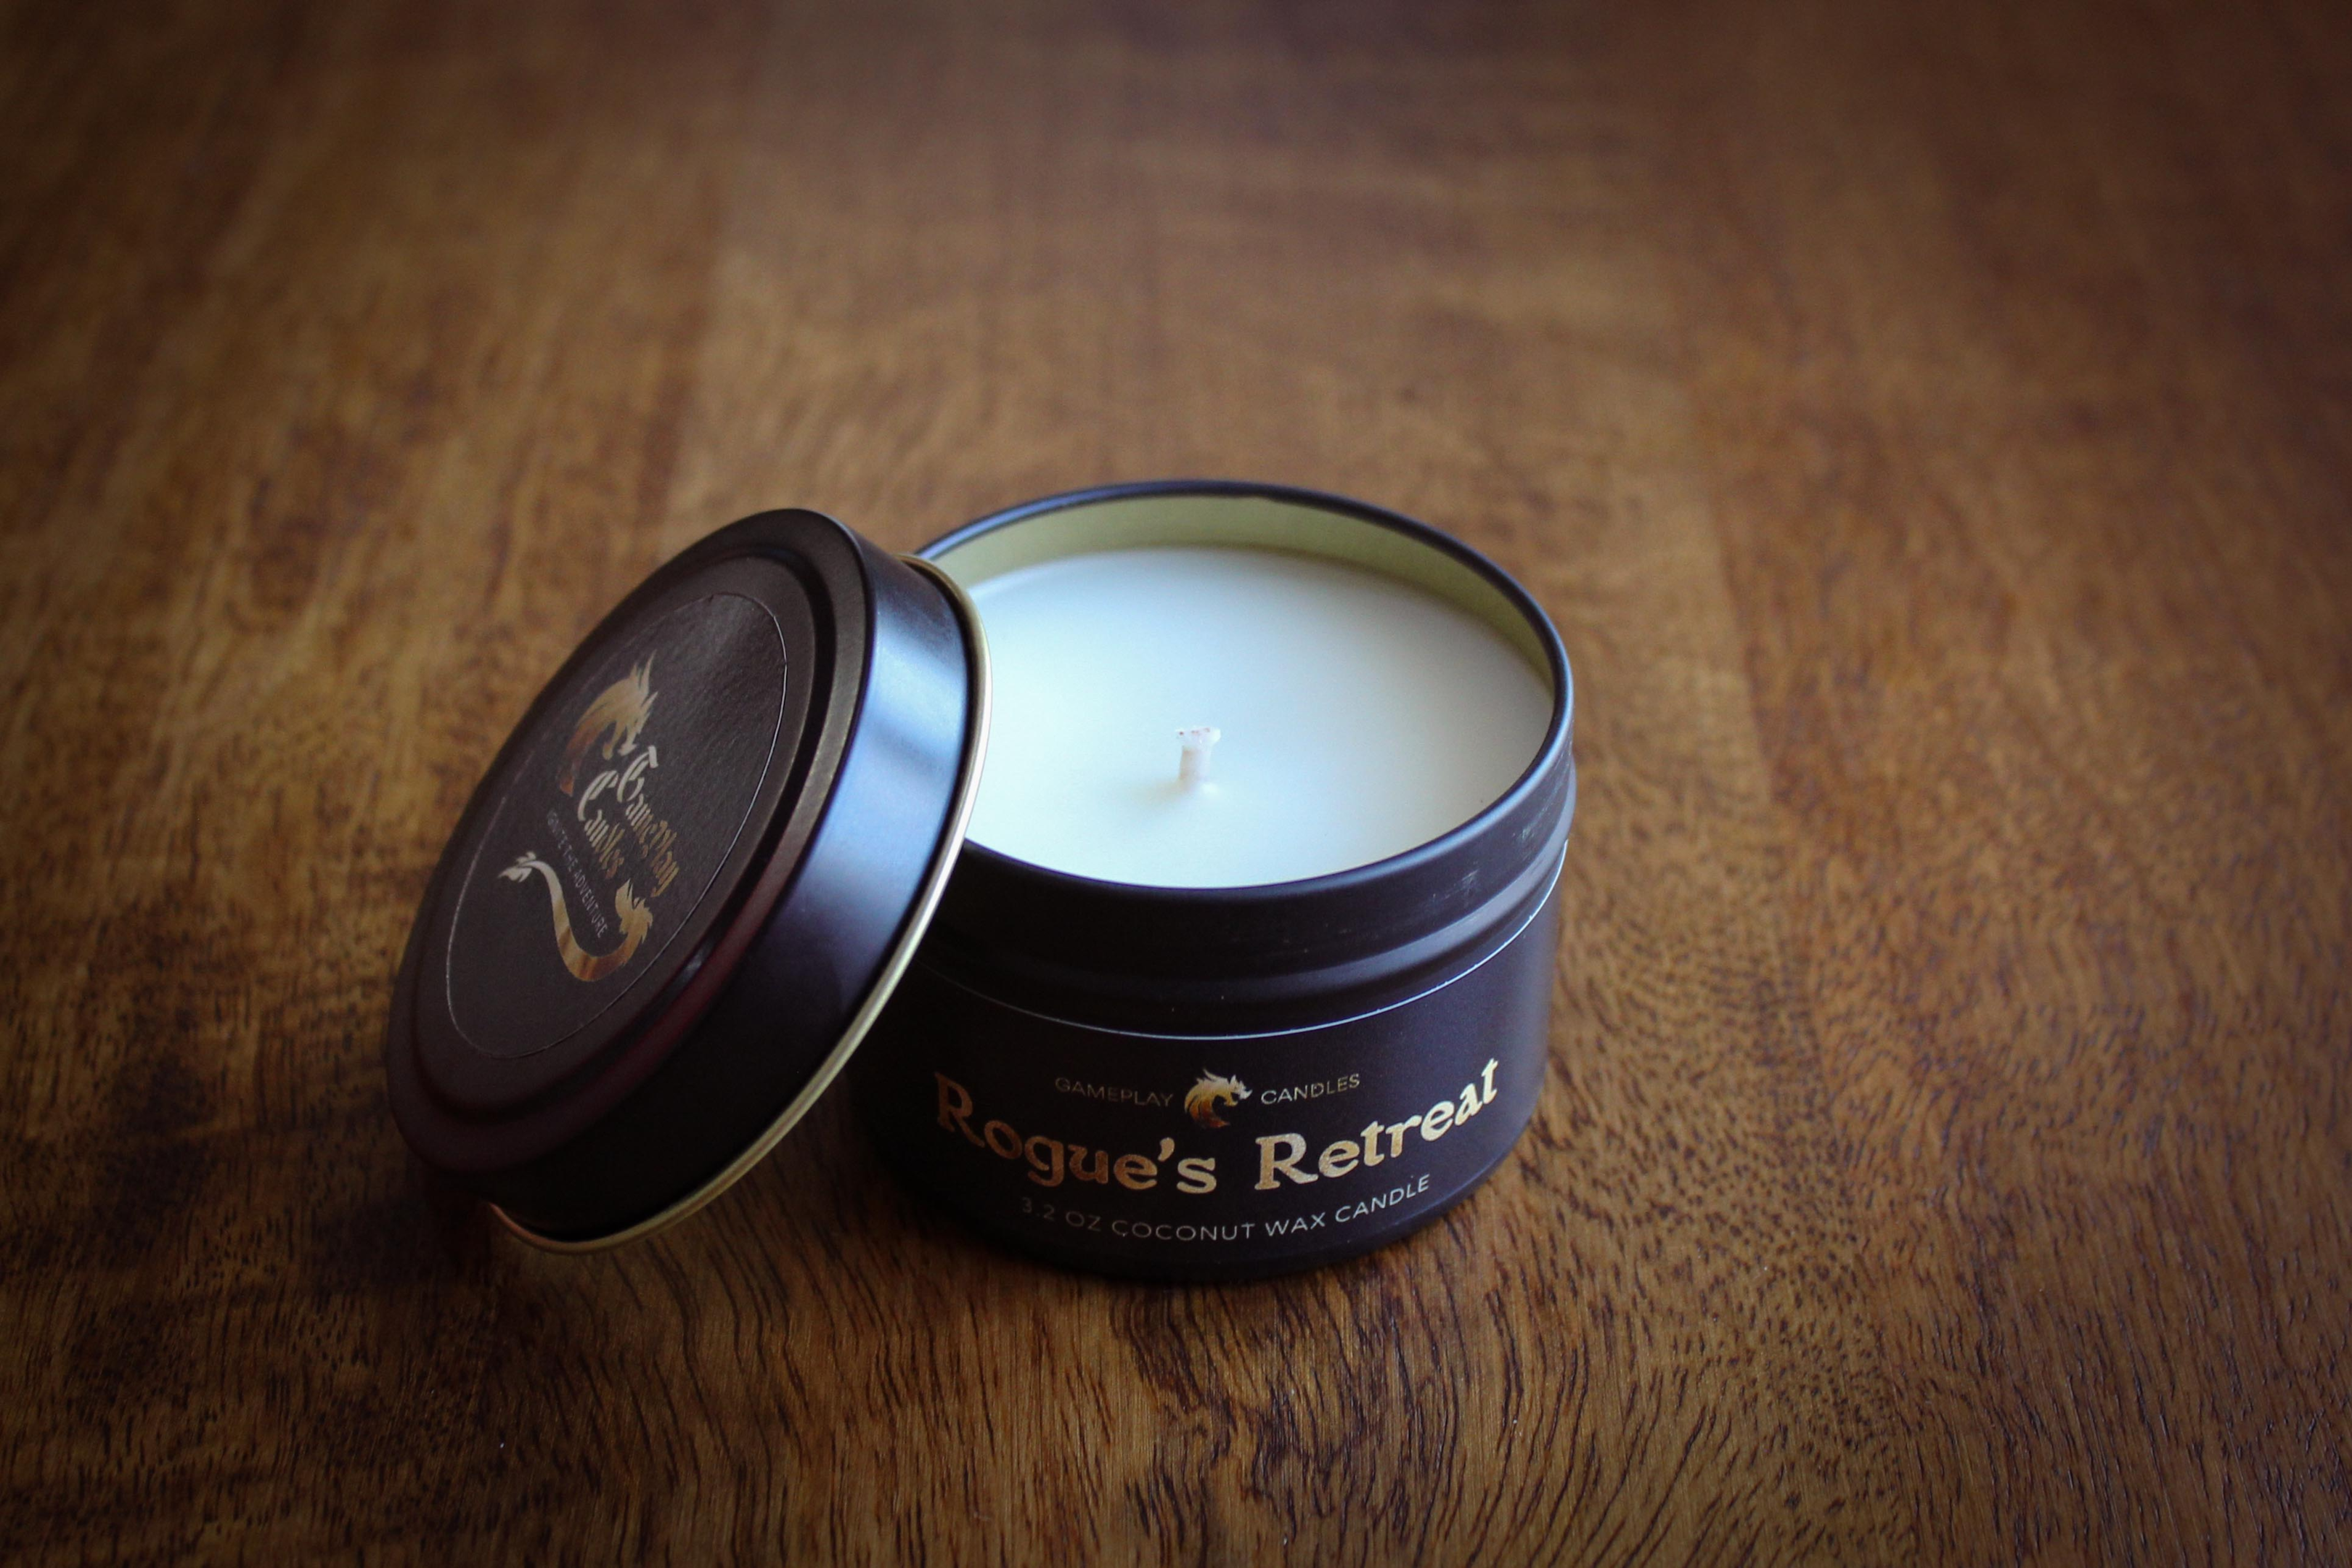 Leather and suede bases mix with lighter notes of herbs, jasmine, and dark chocolate.